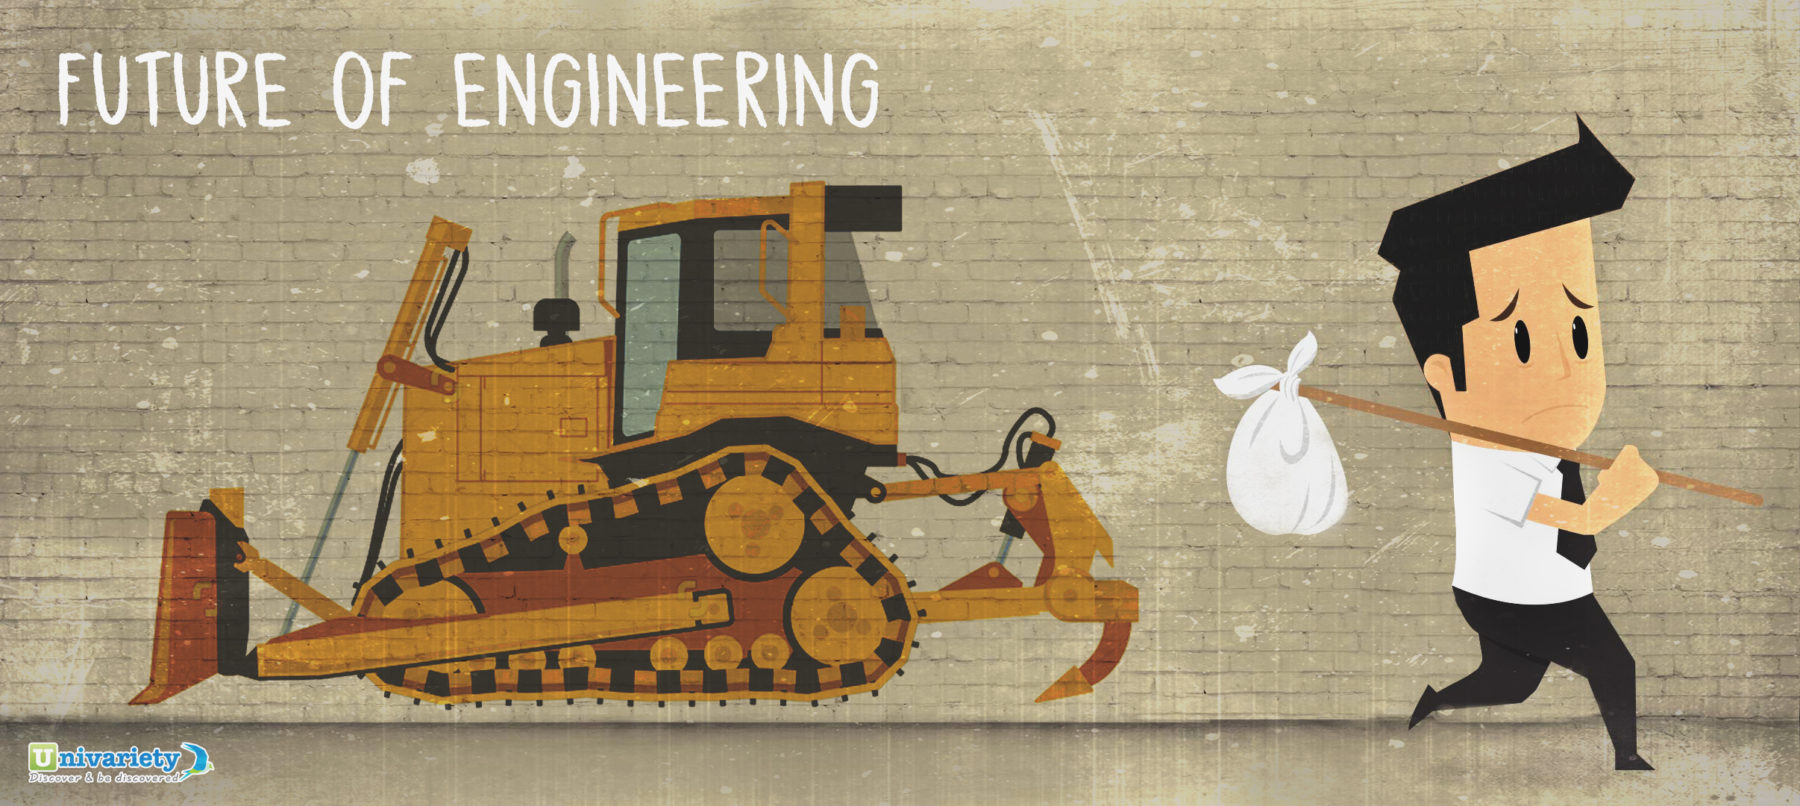 5 Trends That Are Killing Engineering